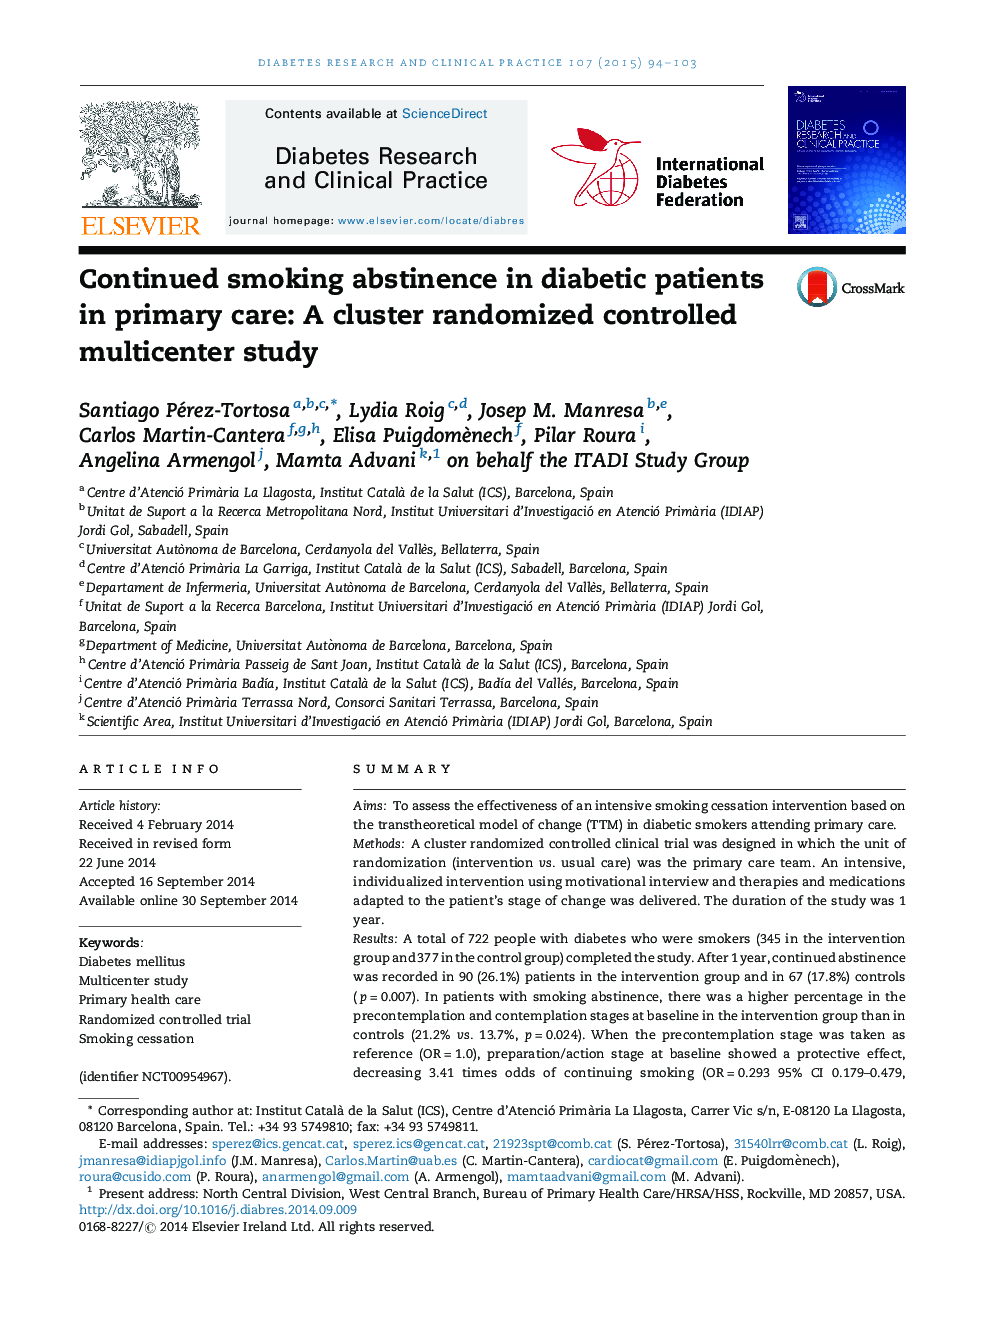 Continued smoking abstinence in diabetic patients in primary care: A cluster randomized controlled multicenter study